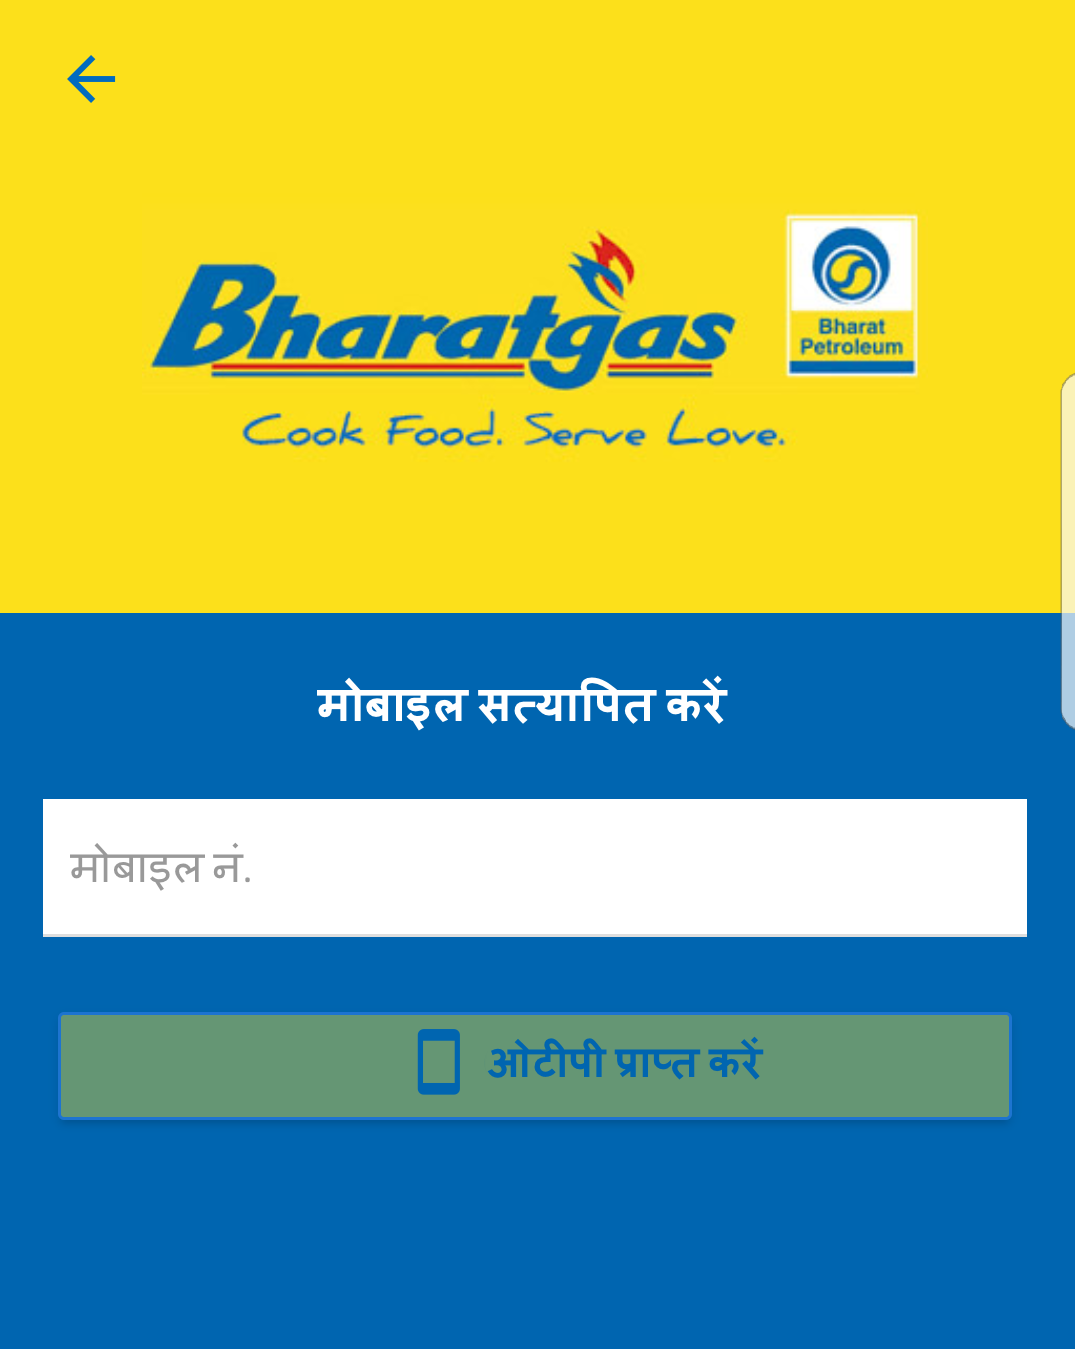 Bharat Gas Logo Download in HD Quality